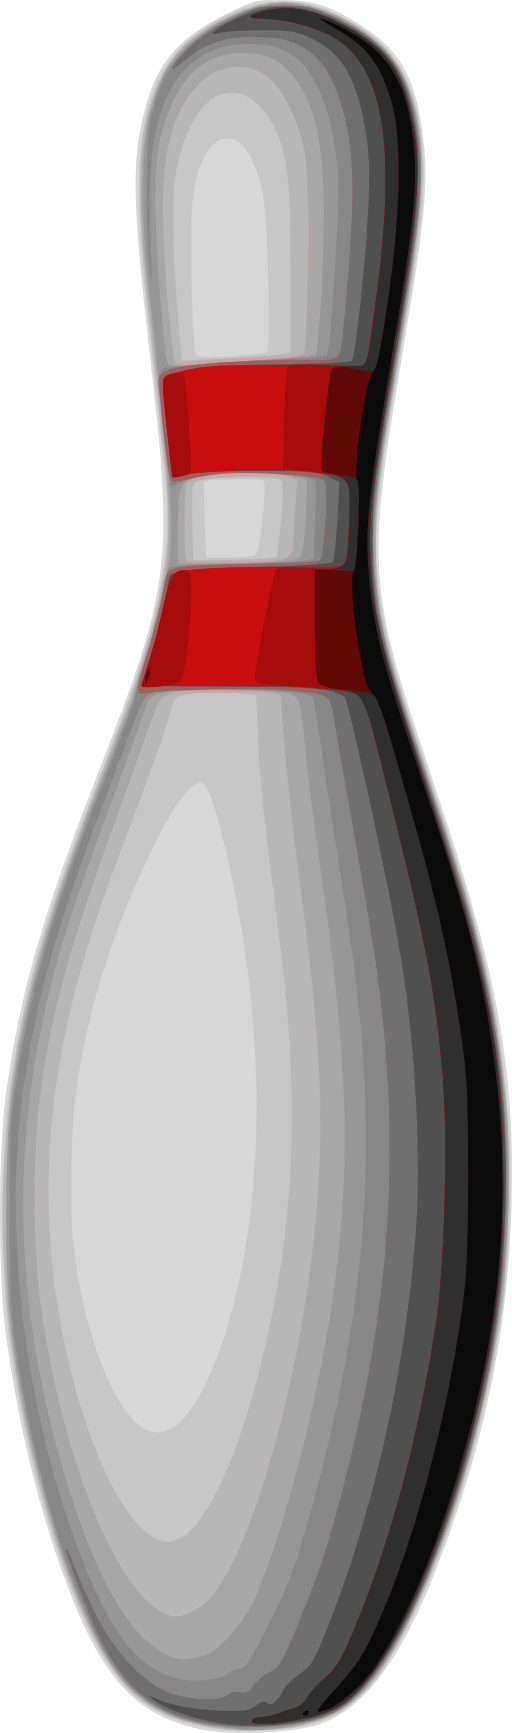 Images For > Bowling Pin Clipart